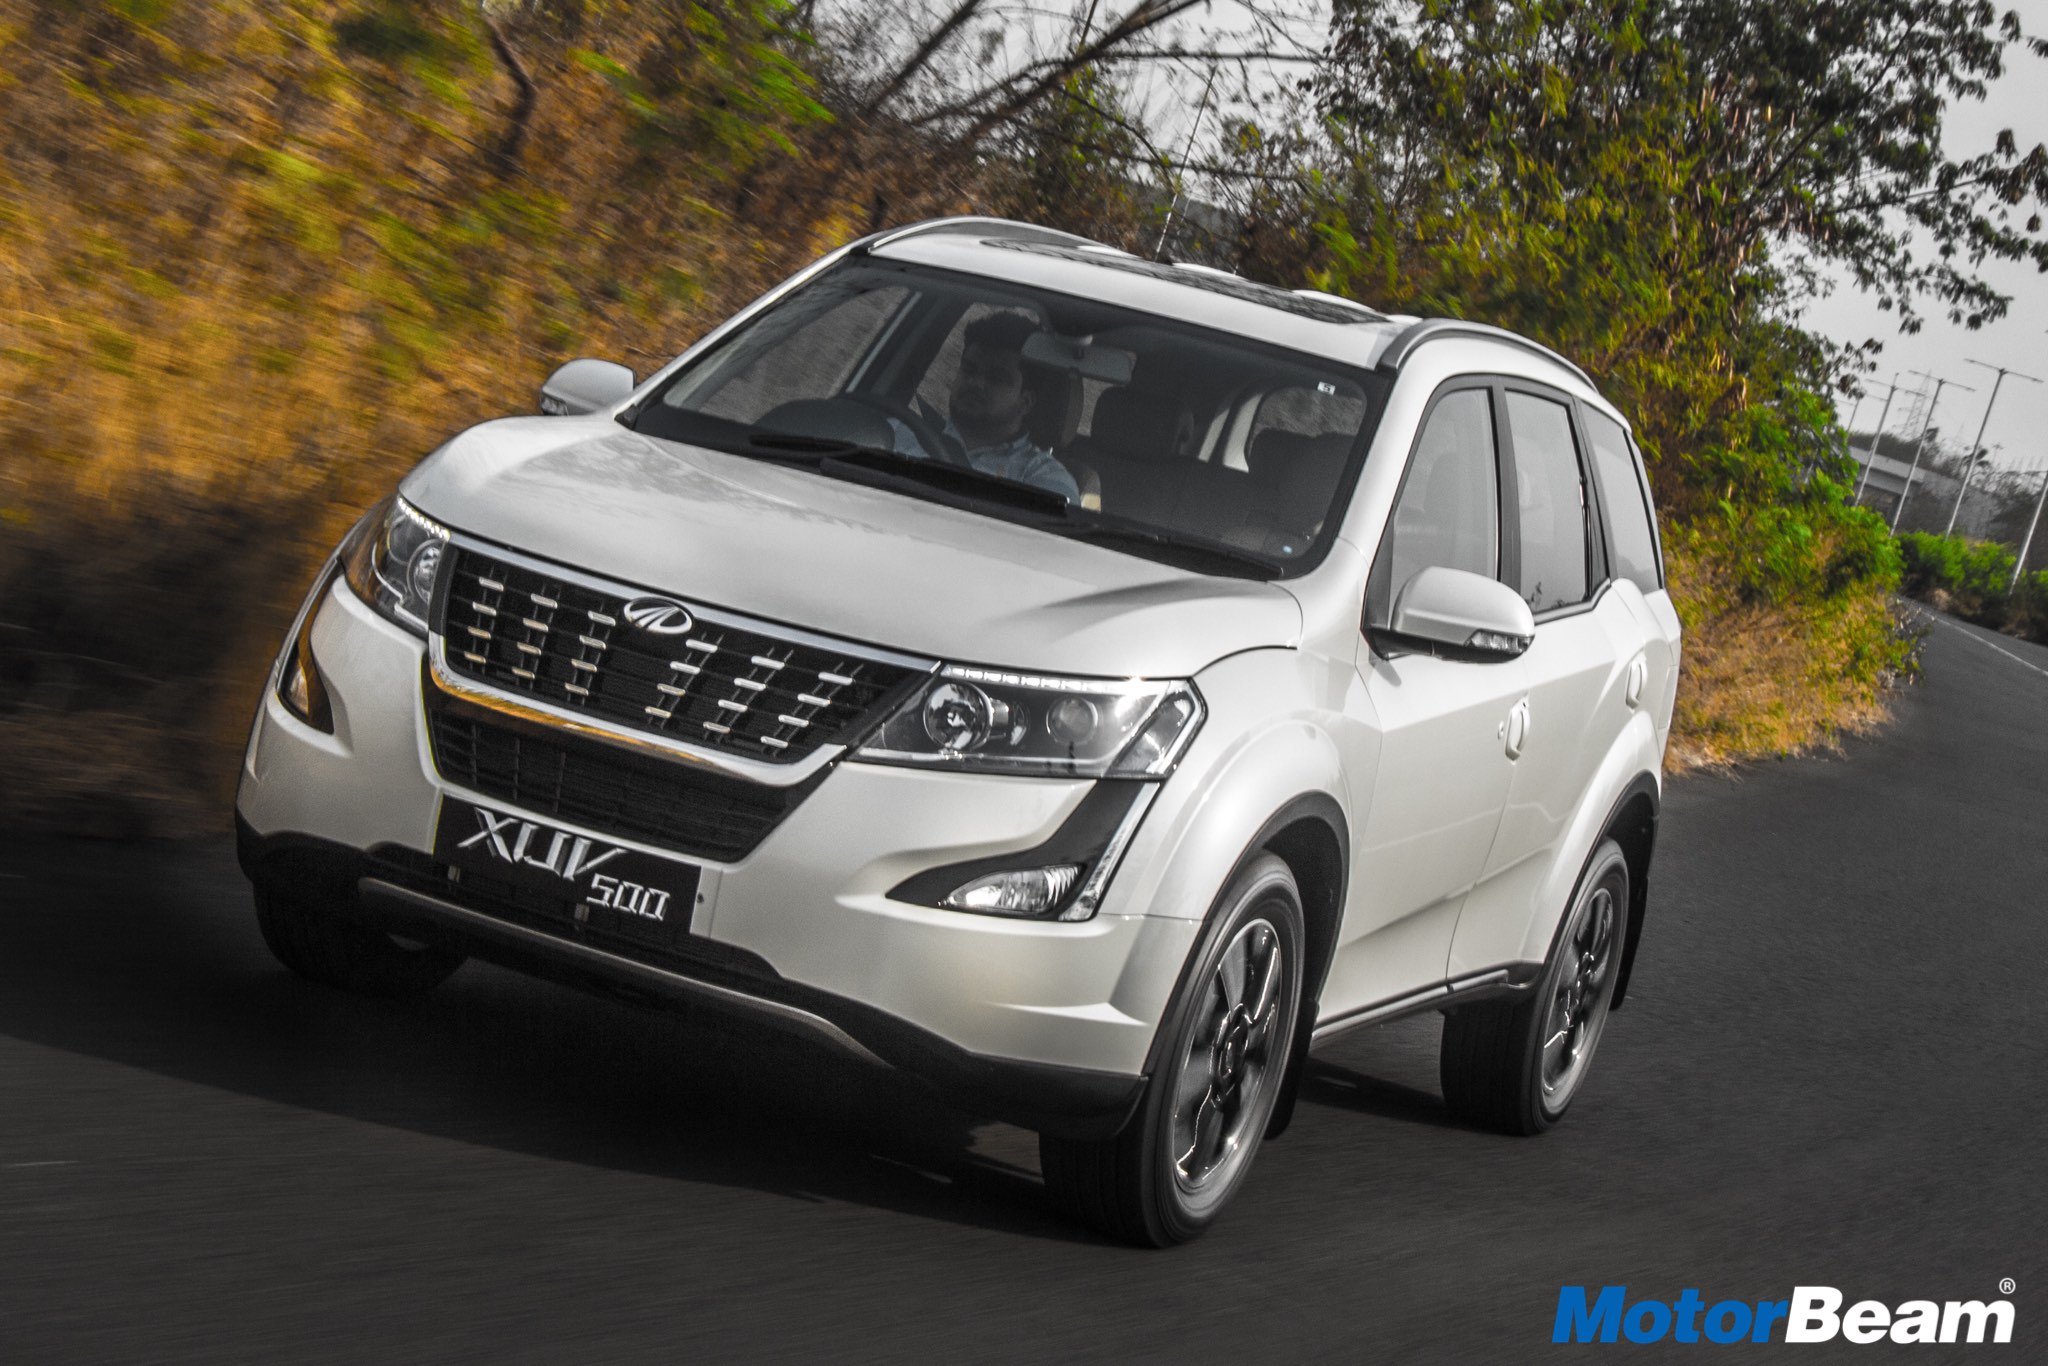 2018 Mahindra Xuv500 Test Drive Review , HD Wallpaper & Backgrounds